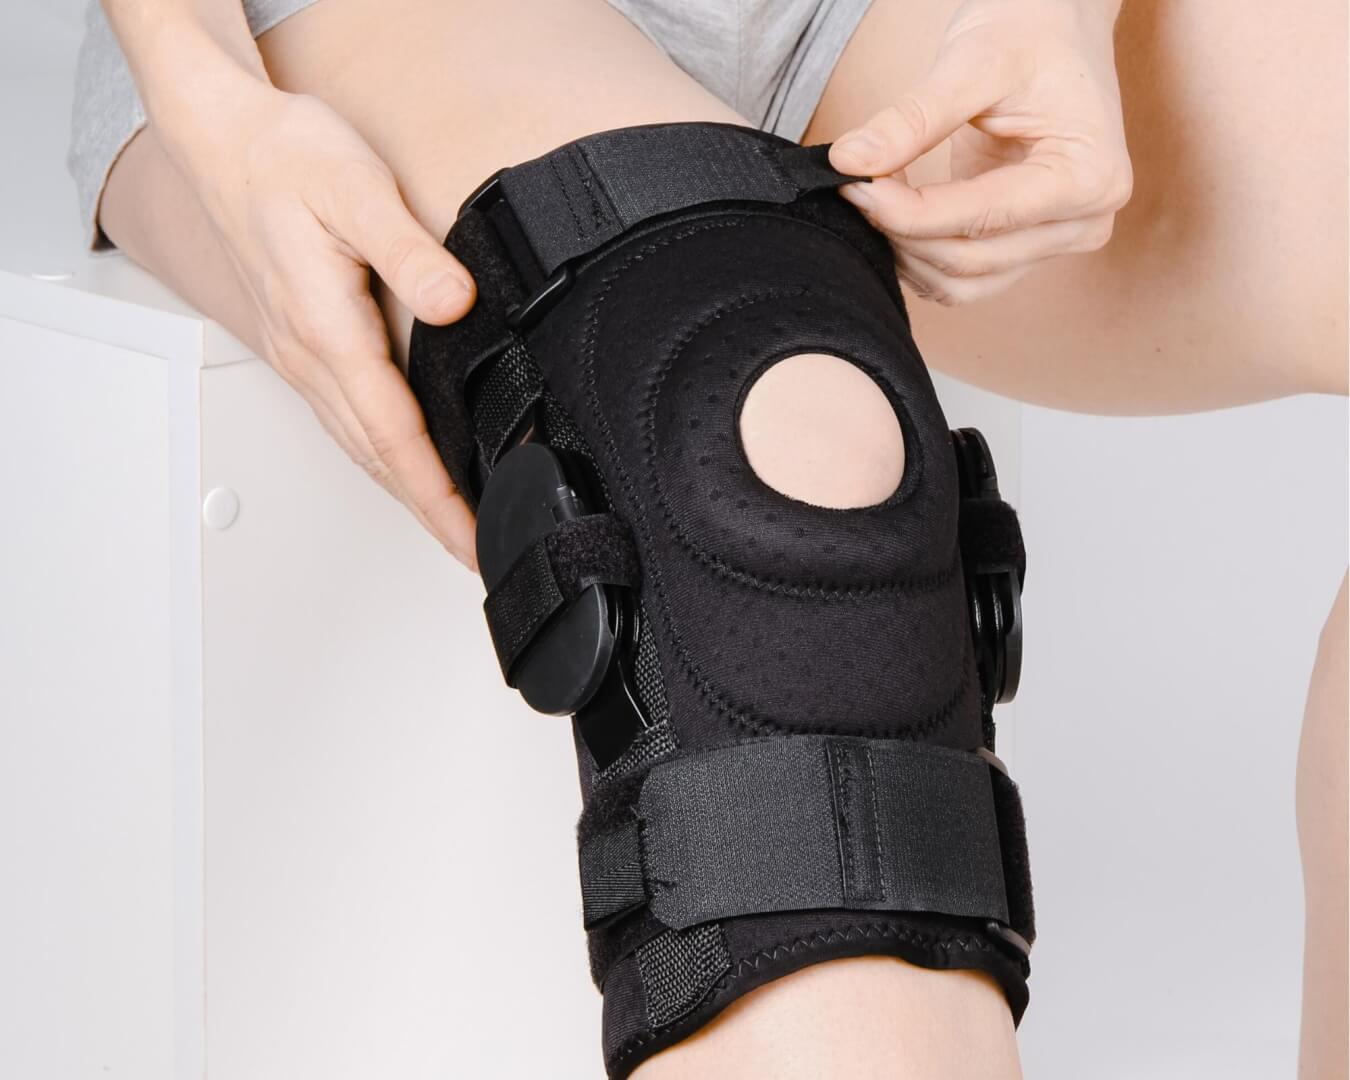 Signs That You May Need a Knee Brace - LiveWell Health and